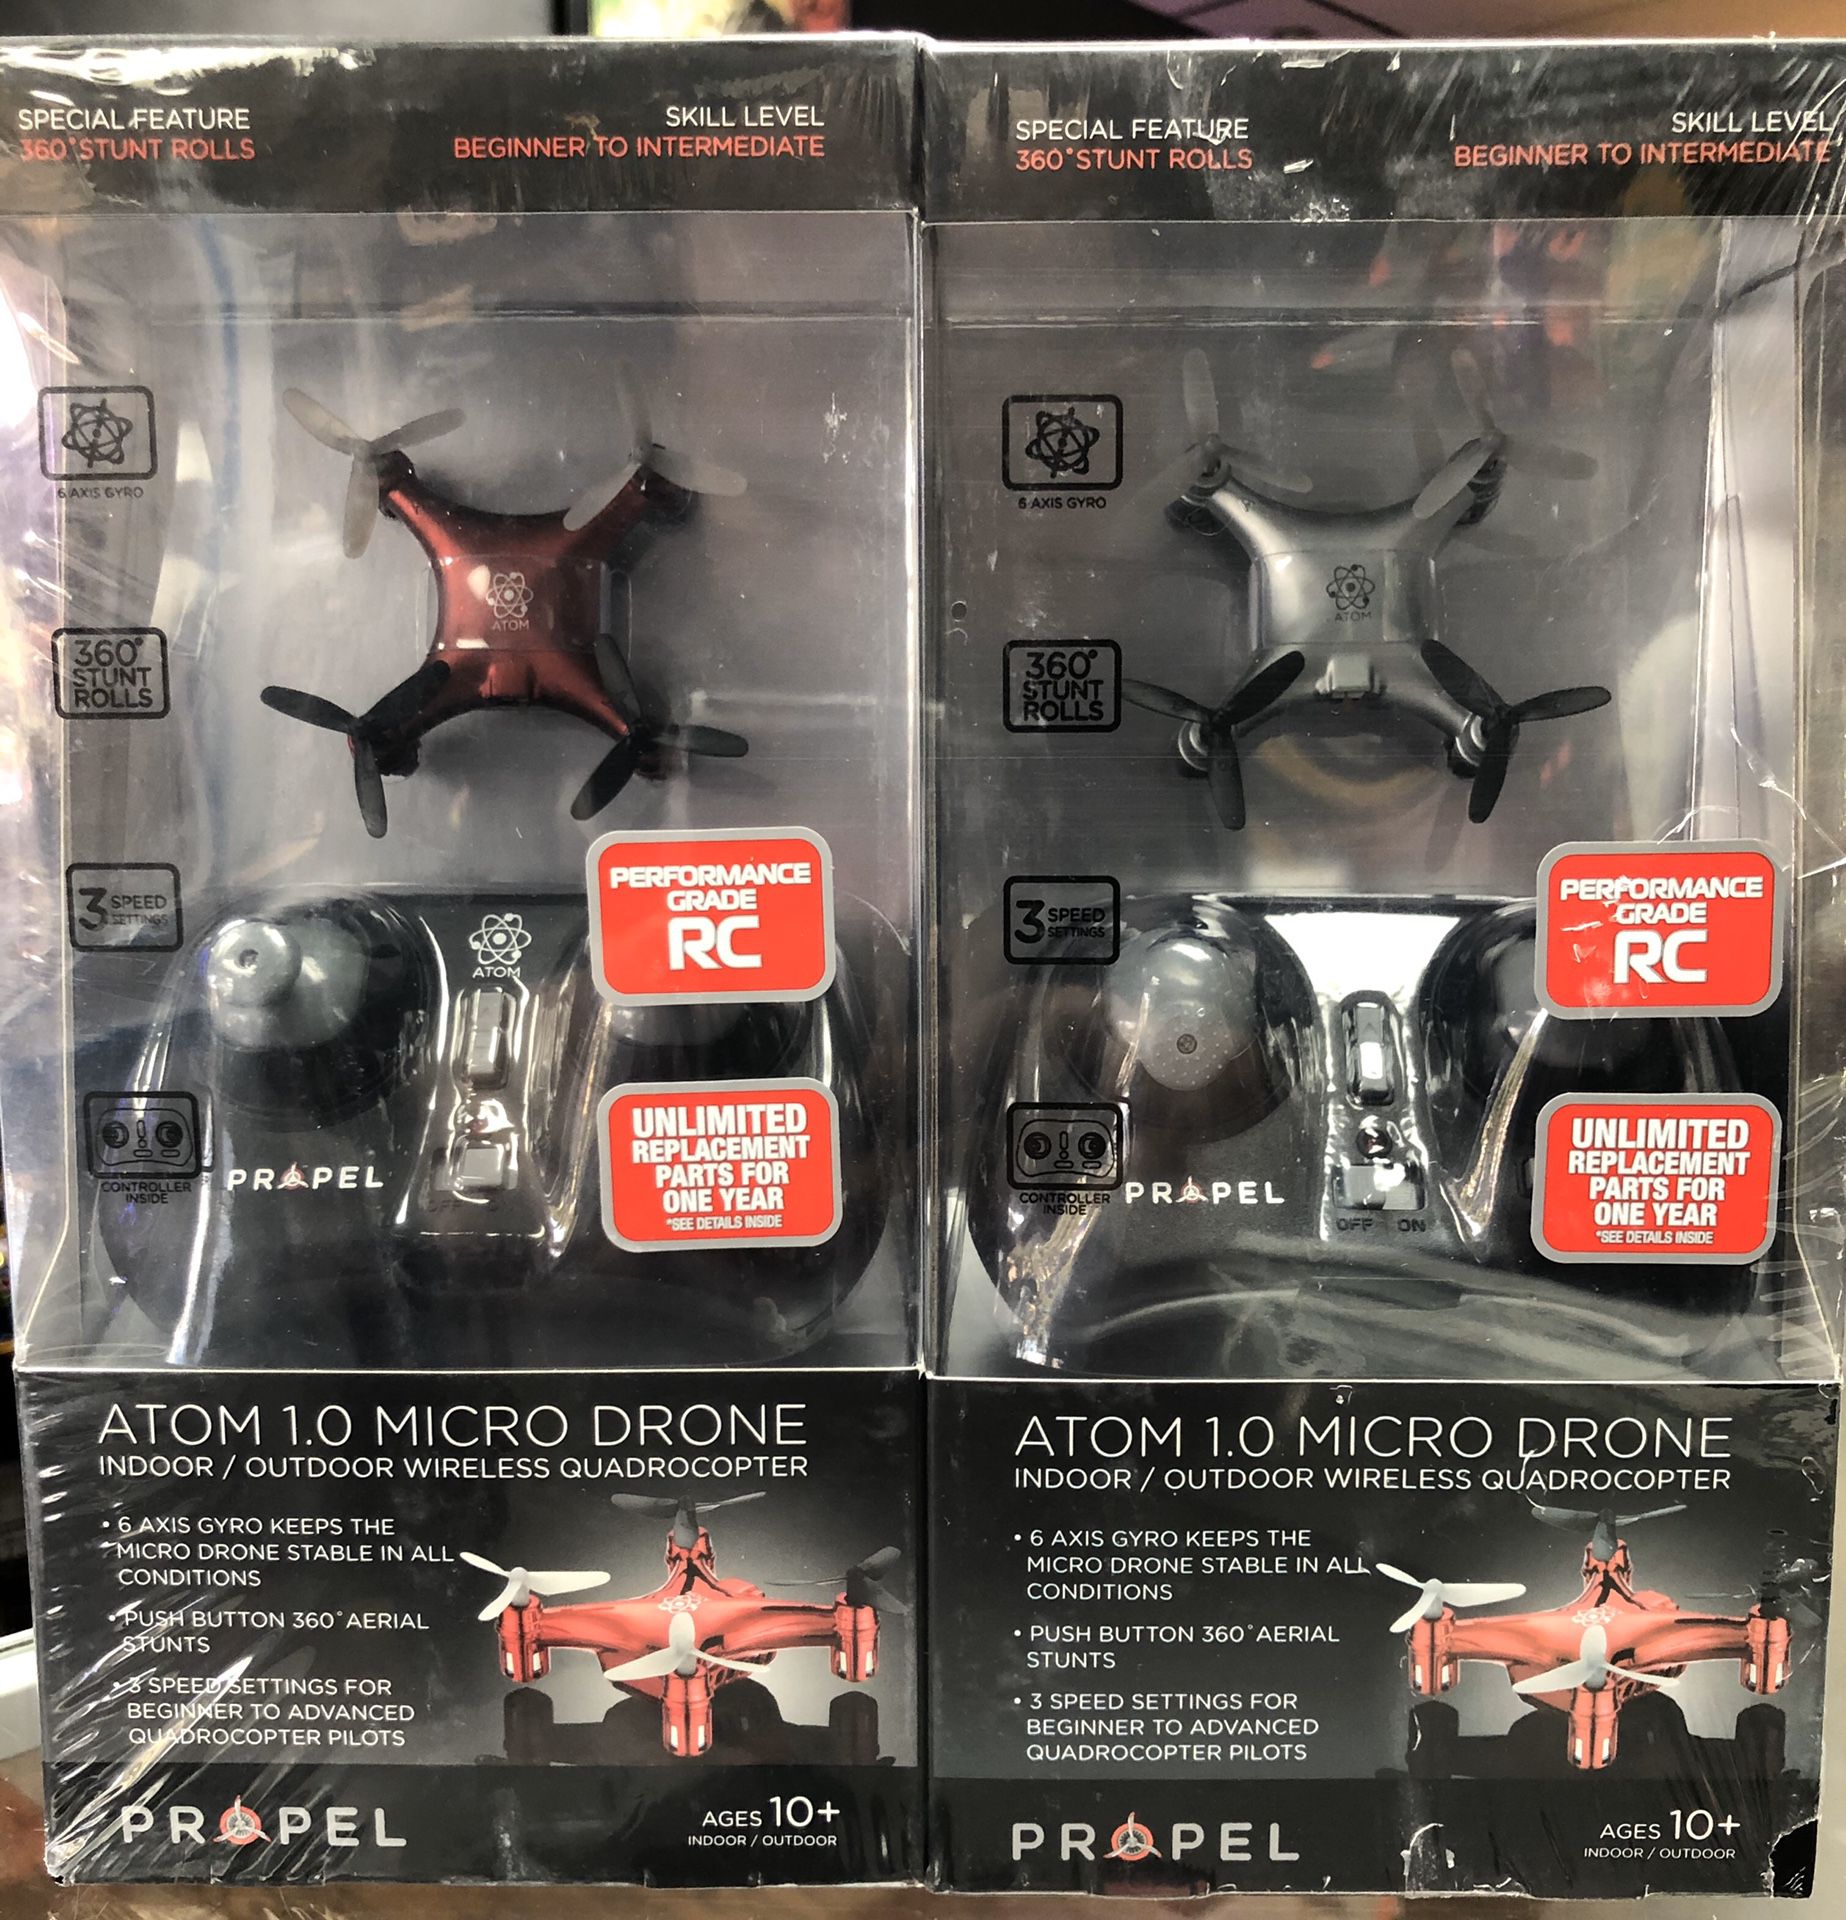 1.0 Micro Drone from ATOM